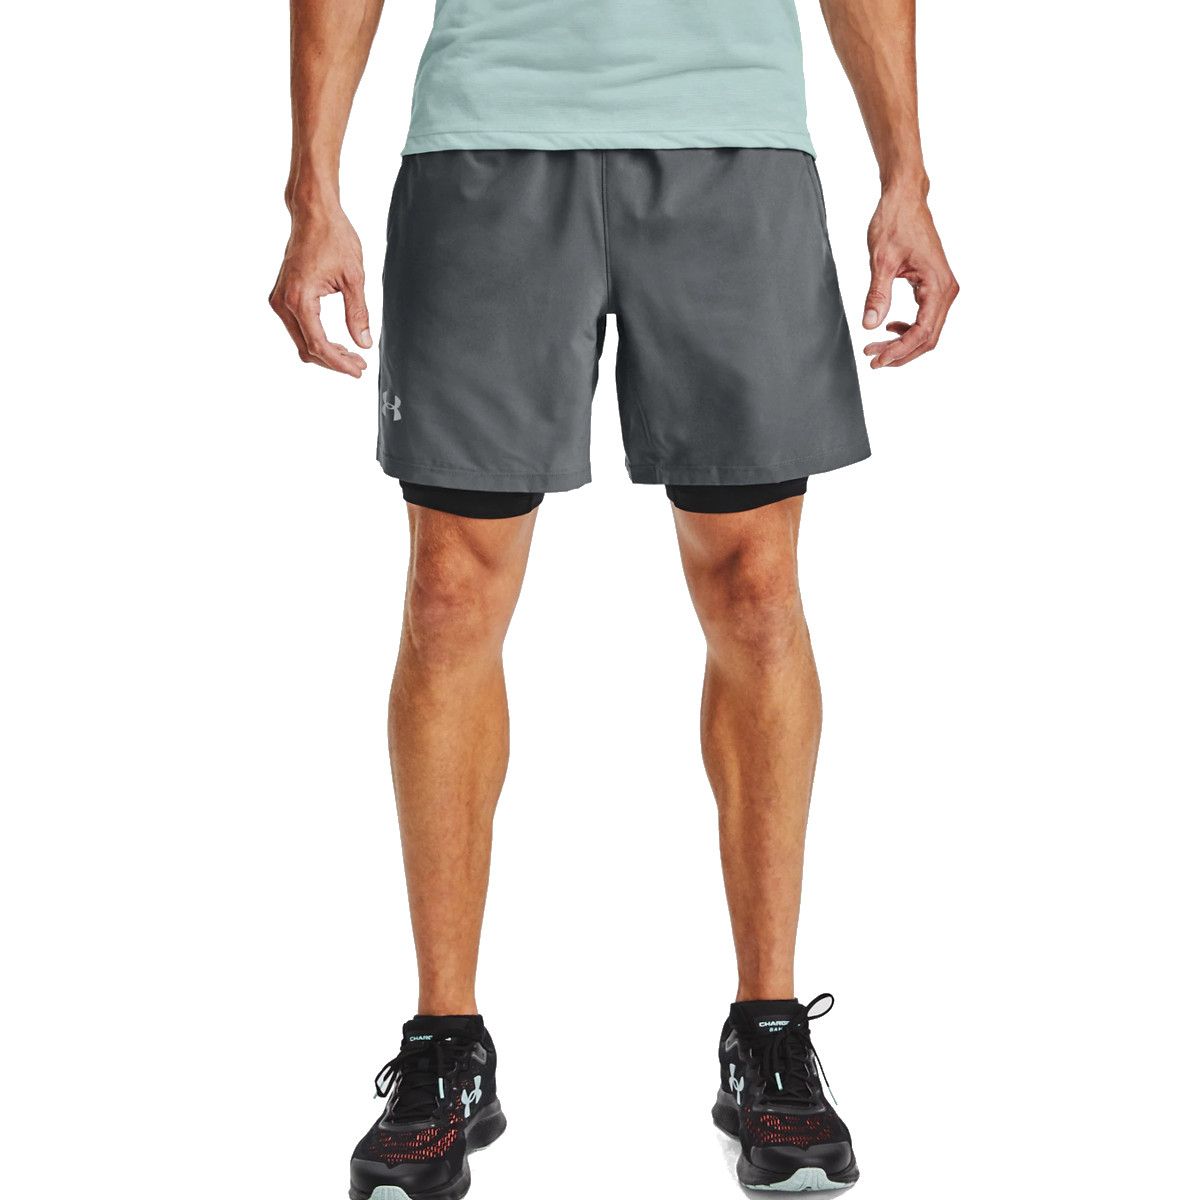 Under Armour Launch SW 2-in-1 Men's Running Shorts 1326576-0